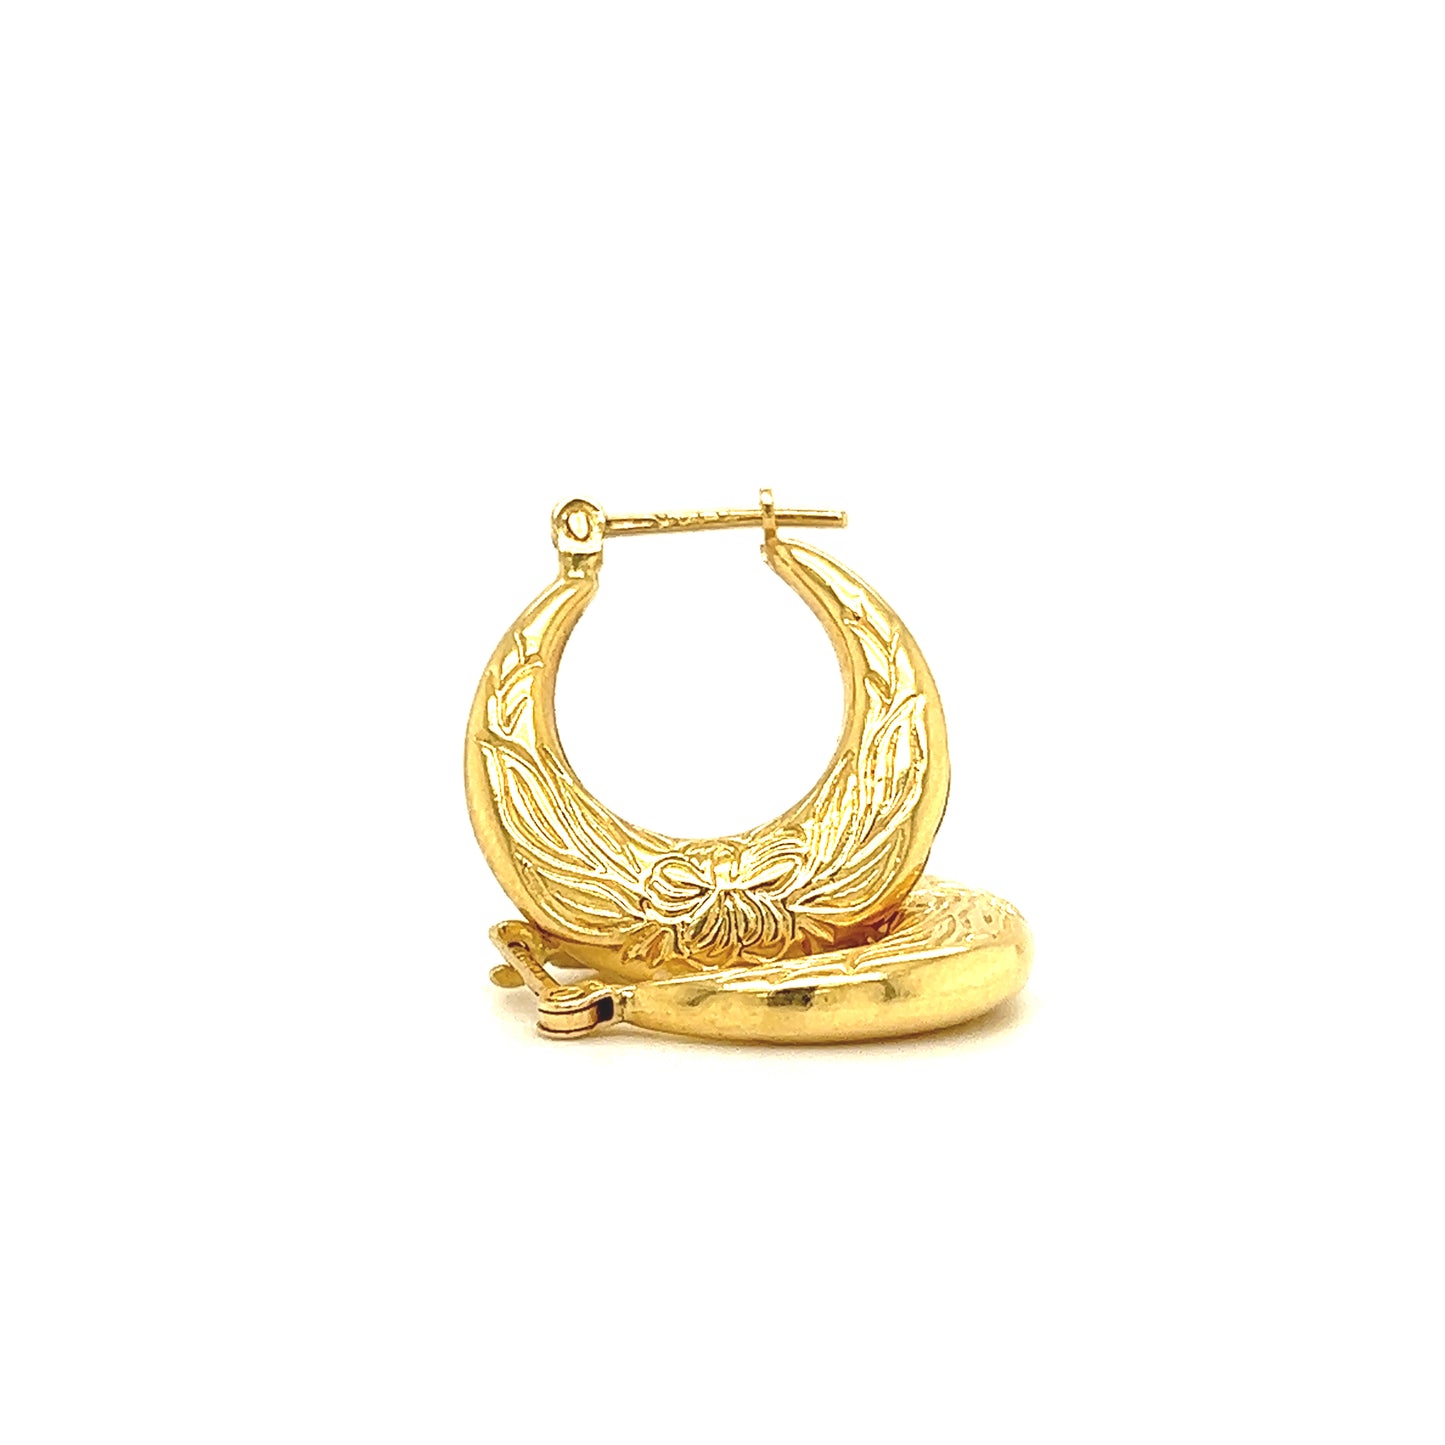 Hoop 18mm Earrings with Flower Engraving in 14K Yellow Gold Front and Side View